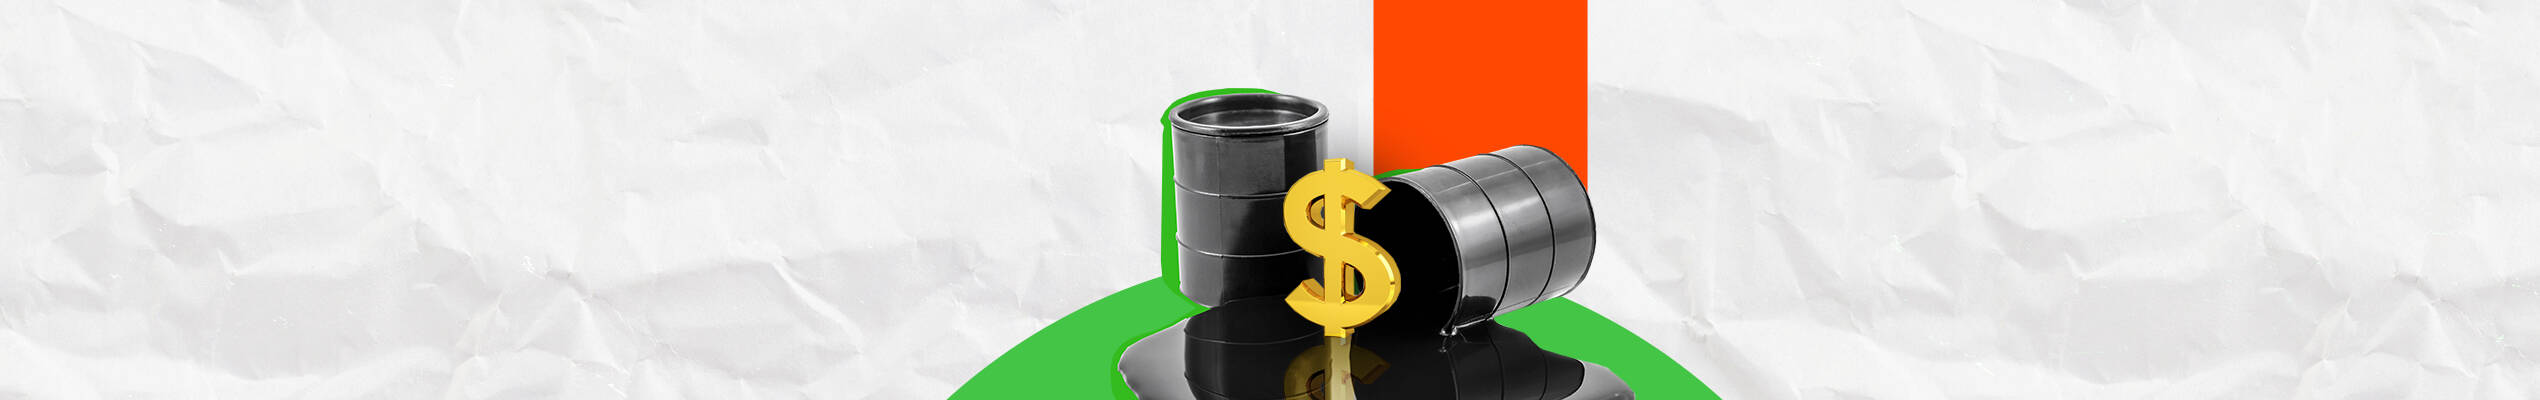 WTI oil: up at $62 while OPEC+ decides